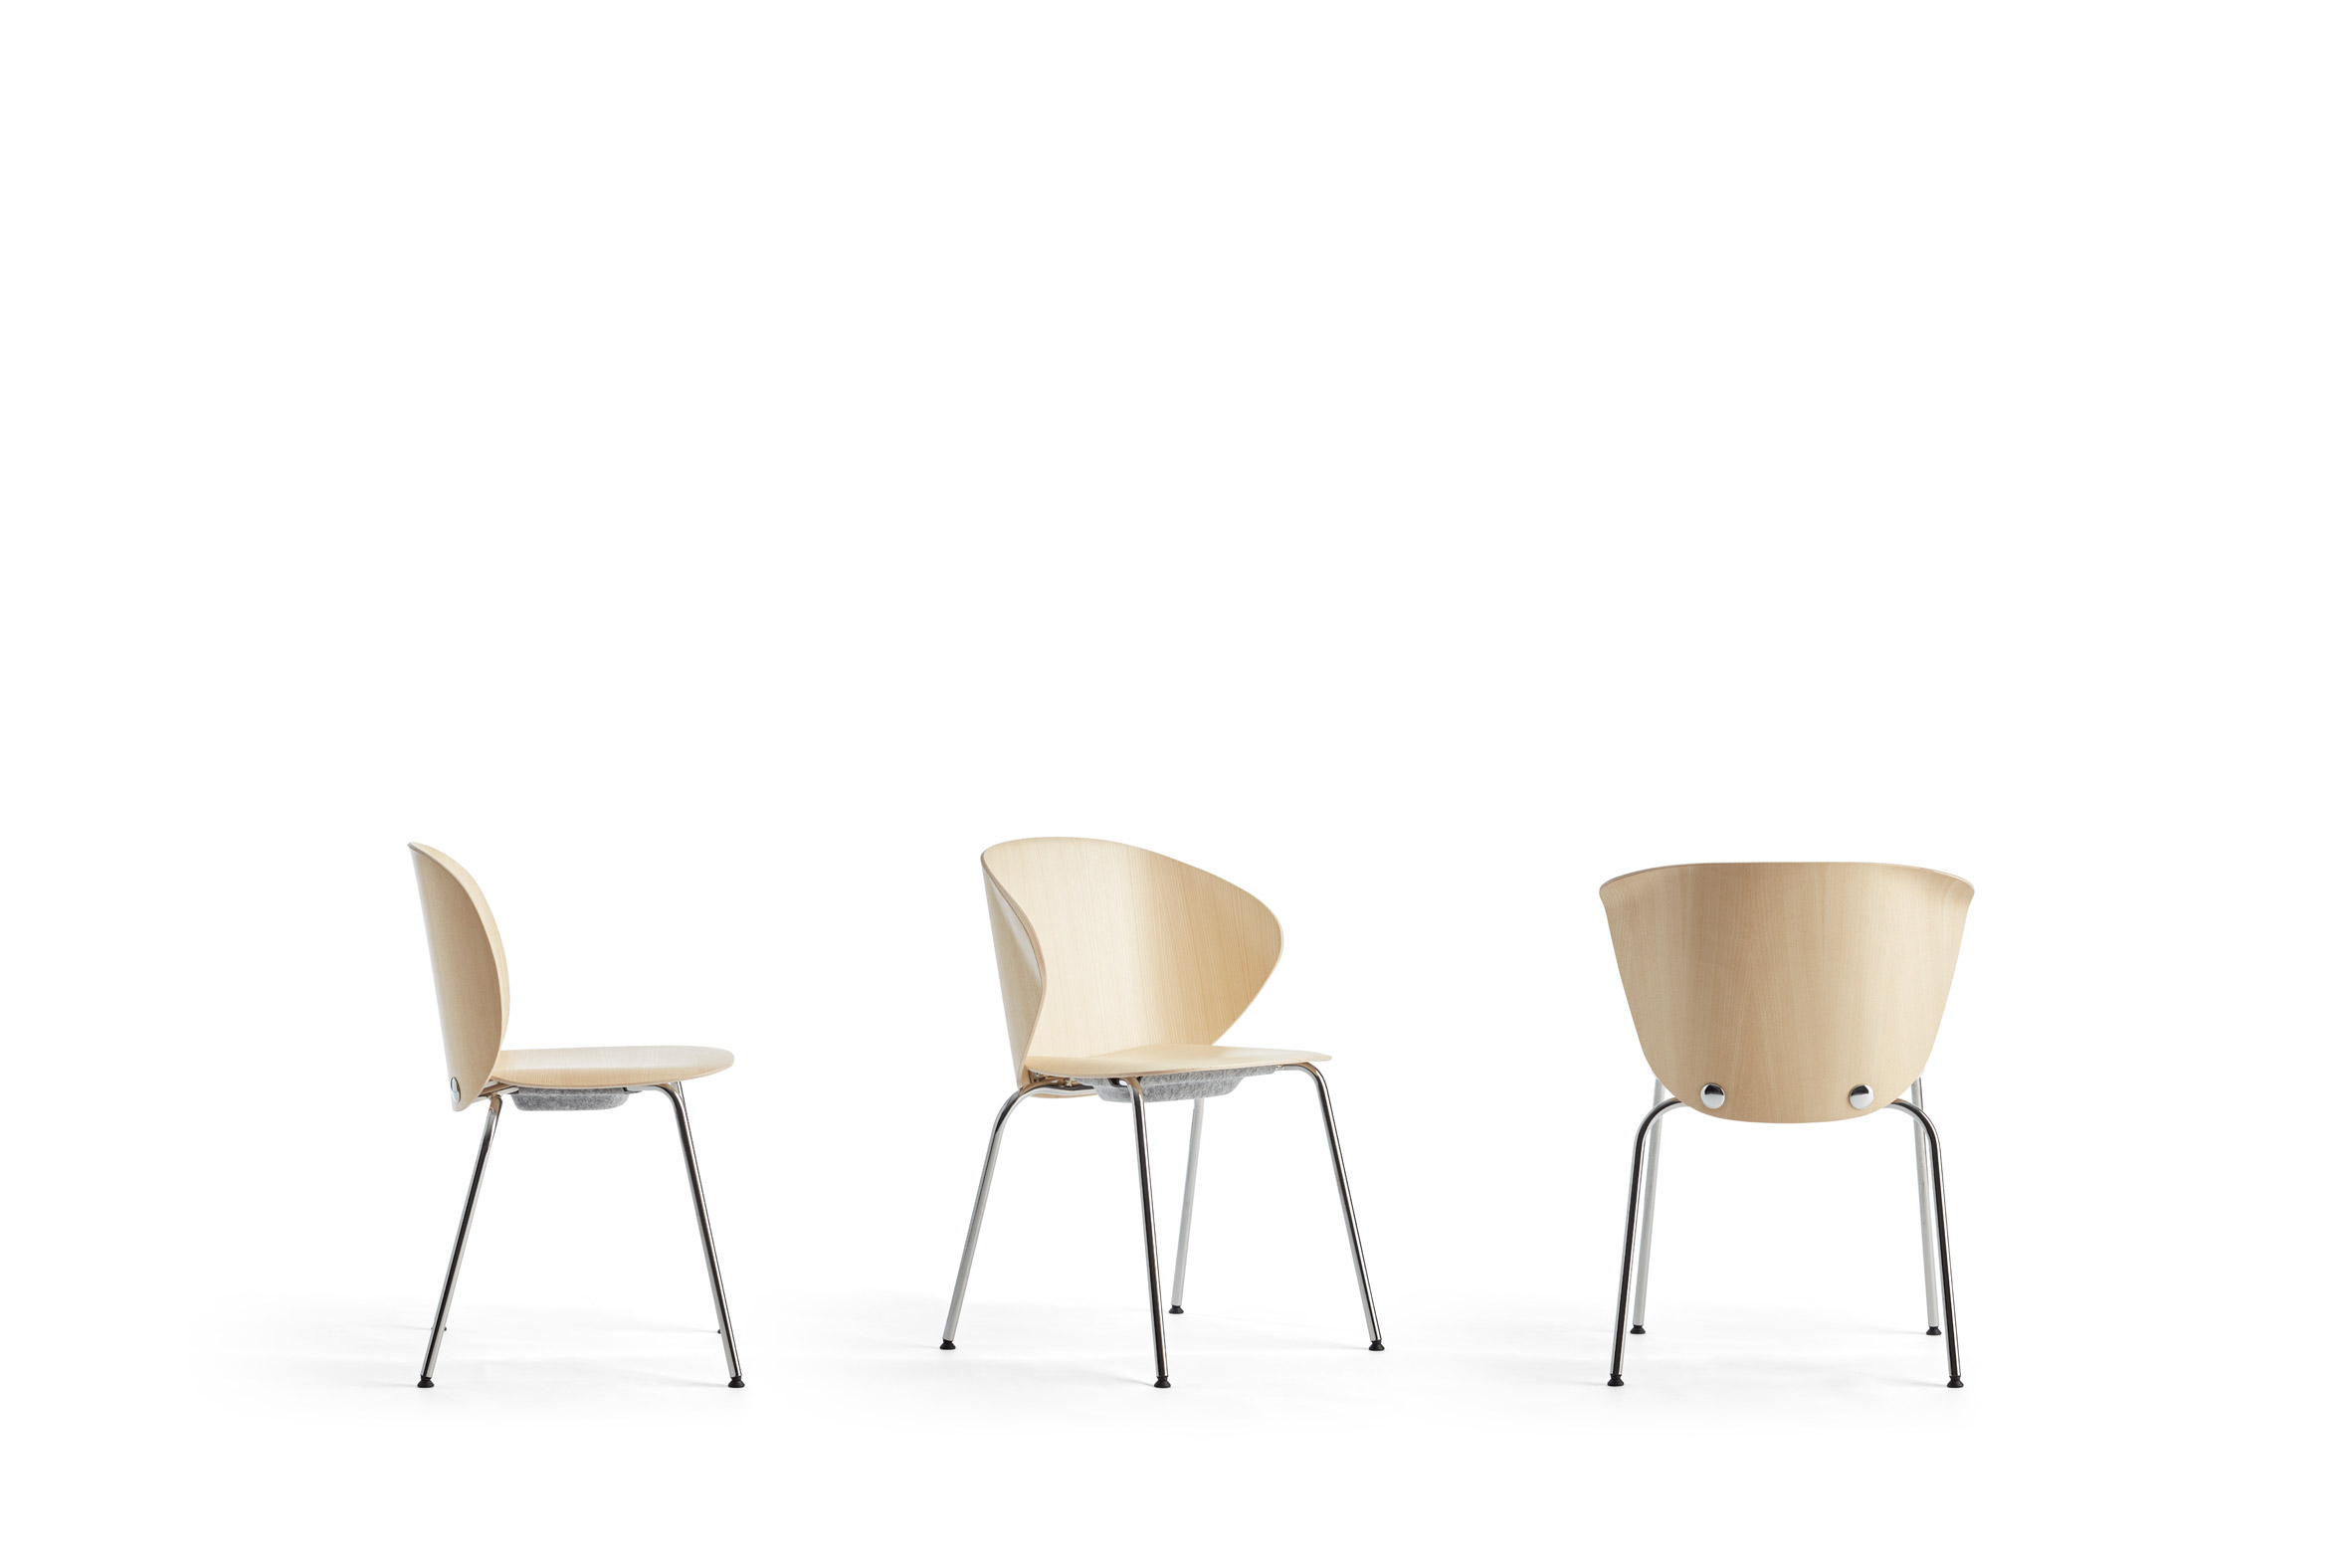 Trioo chairs by Johannes Foersom and Peter Hiort-Lorenzen for Lammhults